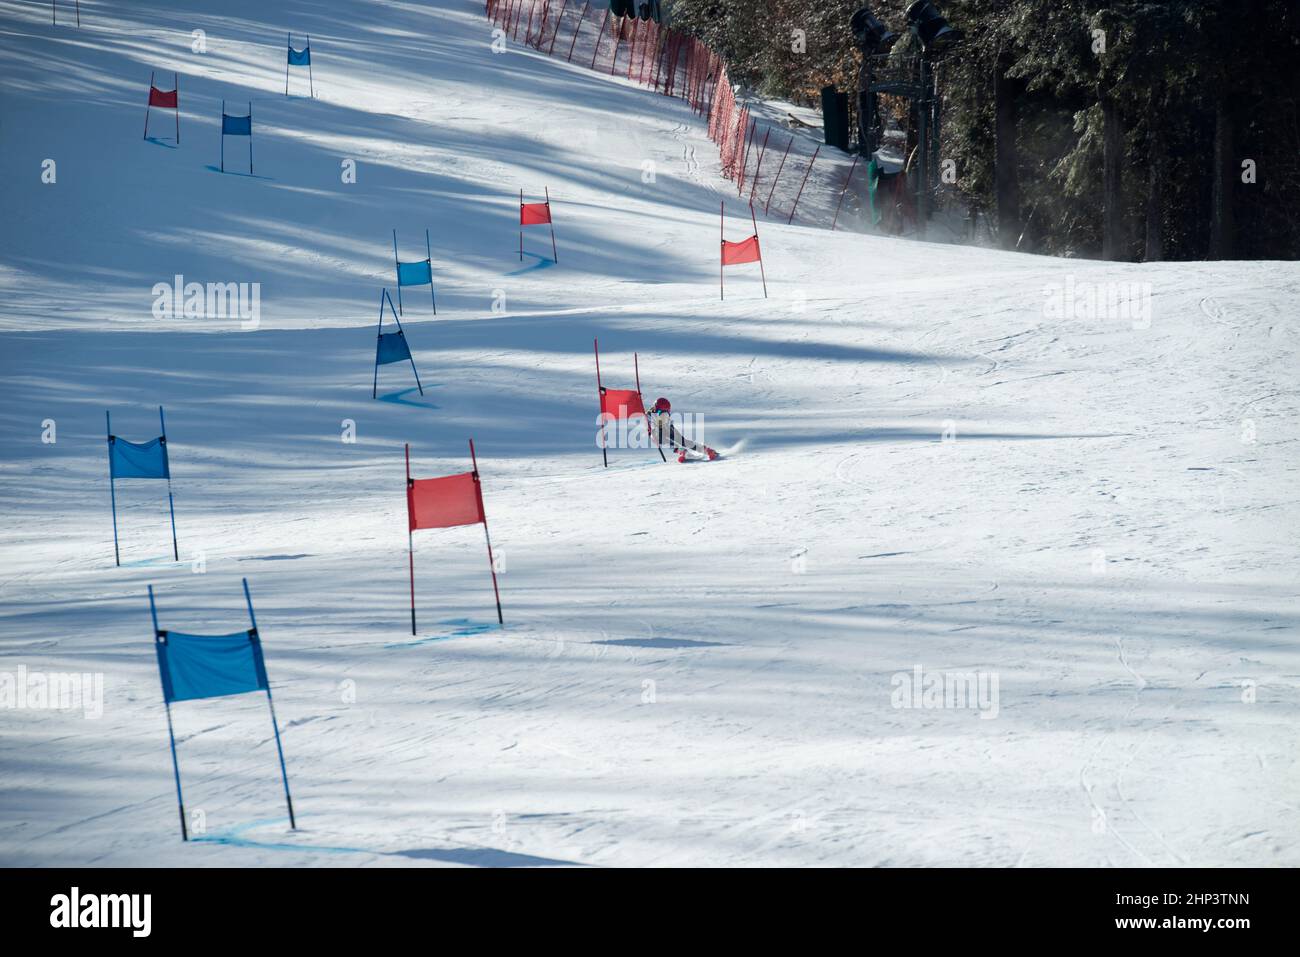 Young female ski racer on course during the 2022 Macomber Giant Slalom ski race at Crotched Mountain Ski area in Bennington, New Hampshire, USA. Stock Photo